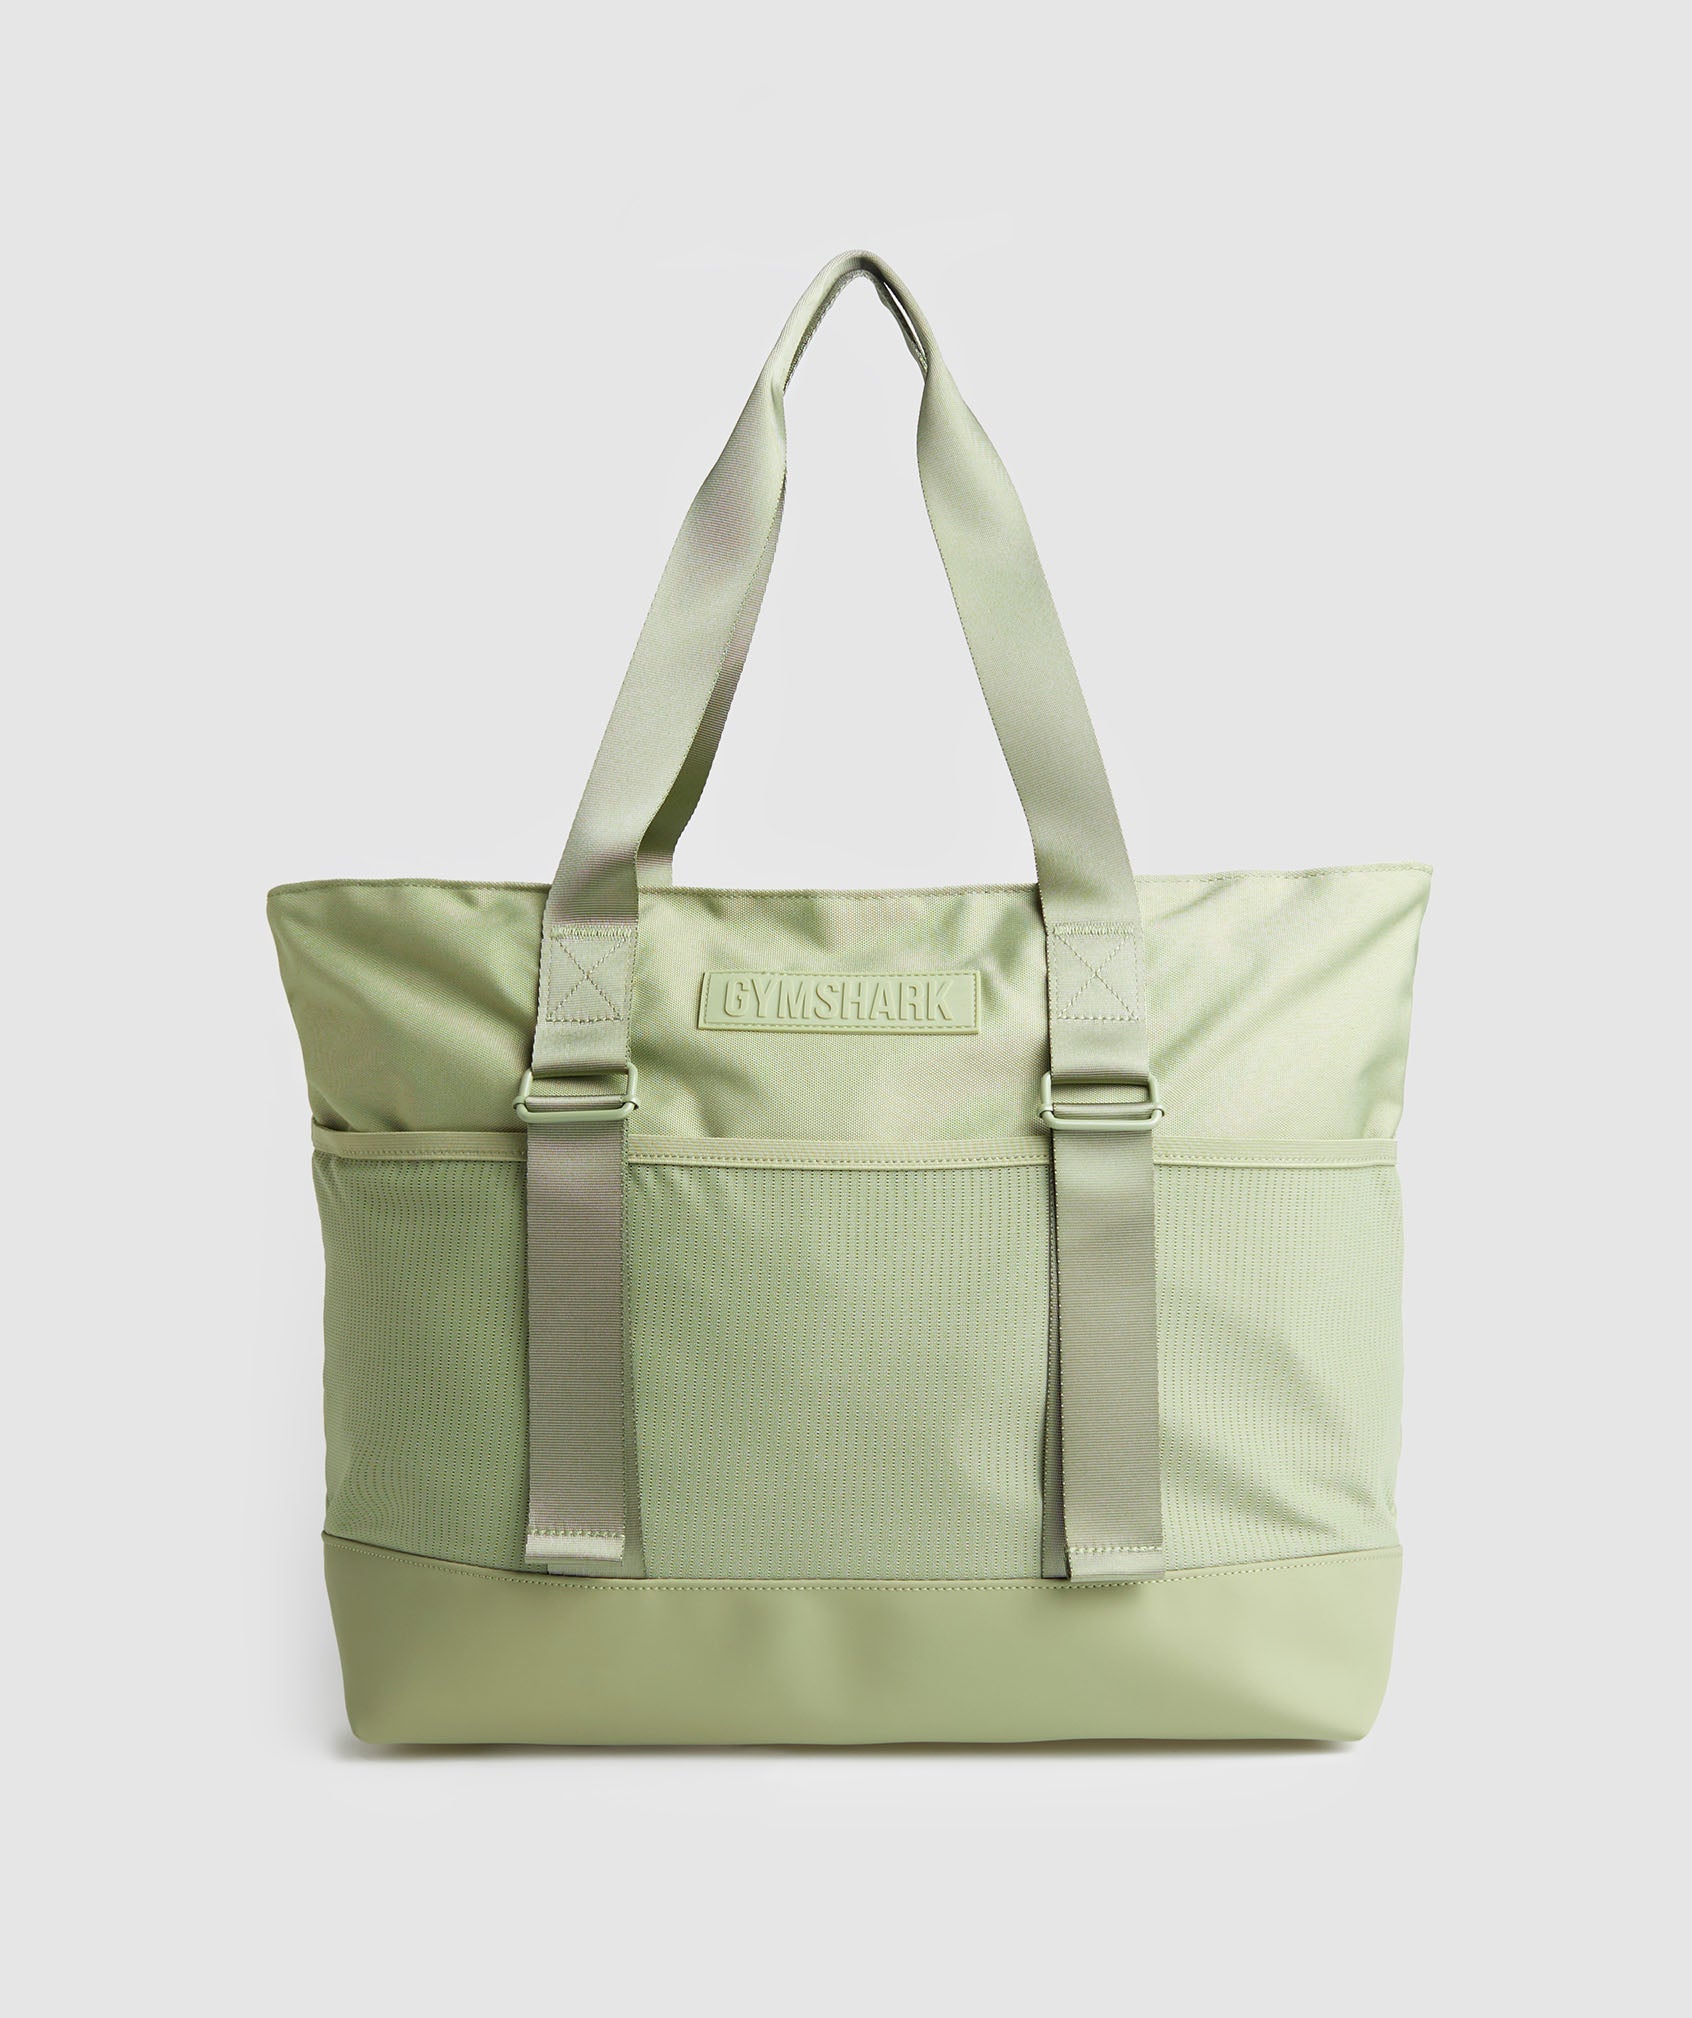 Everyday Tote in Natural Sage Green - view 1